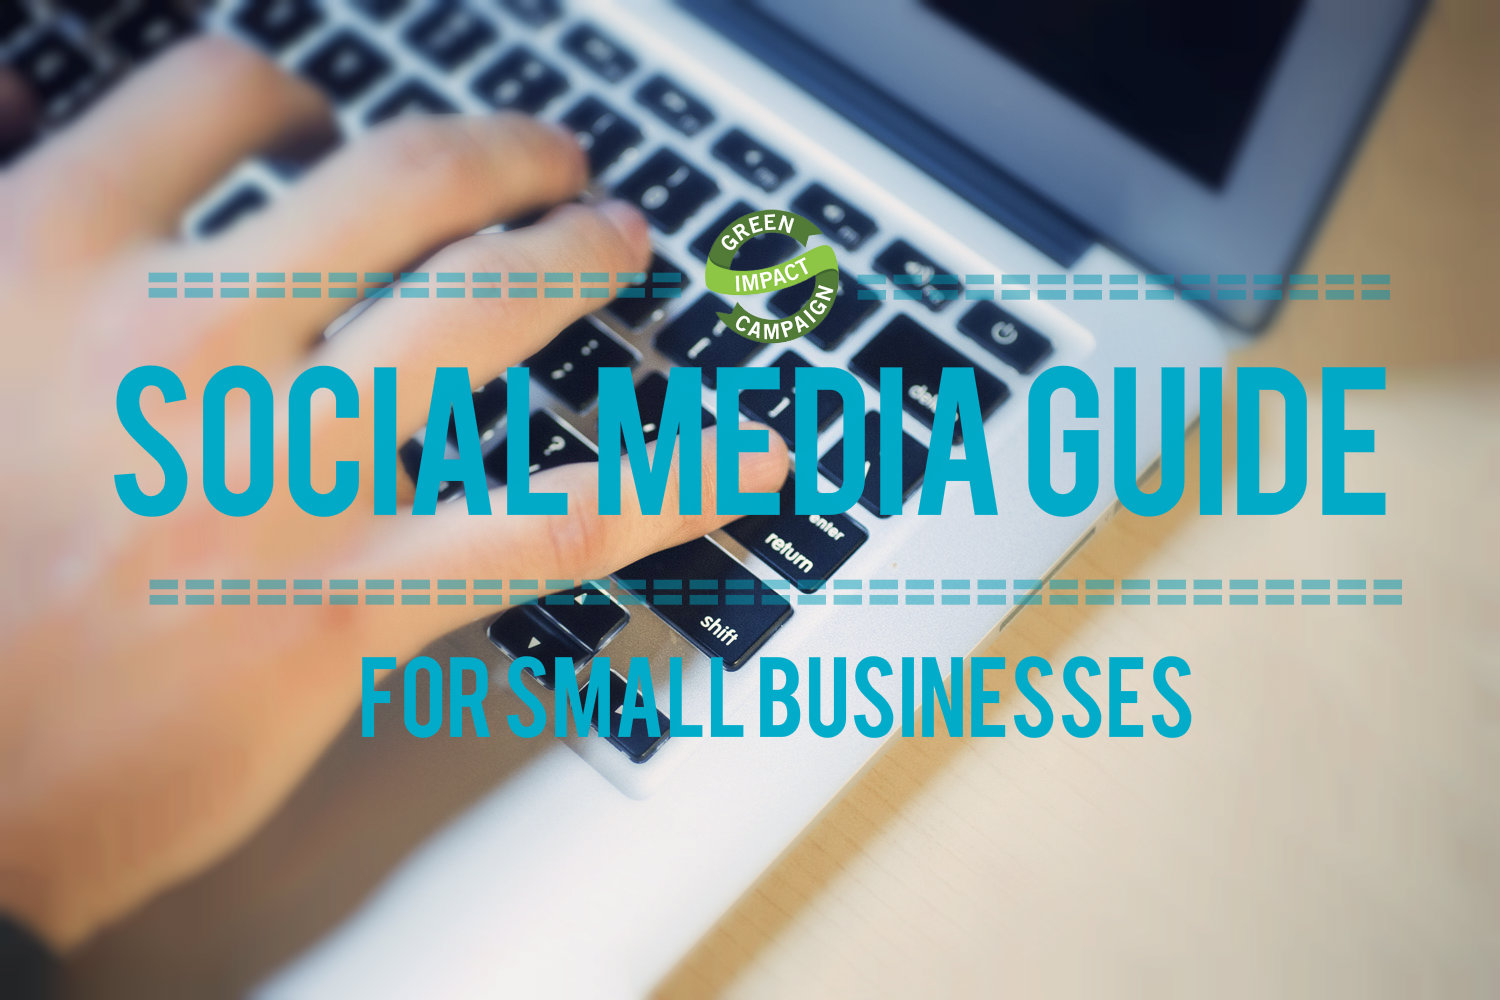 green impact campaign social media guide gic small business